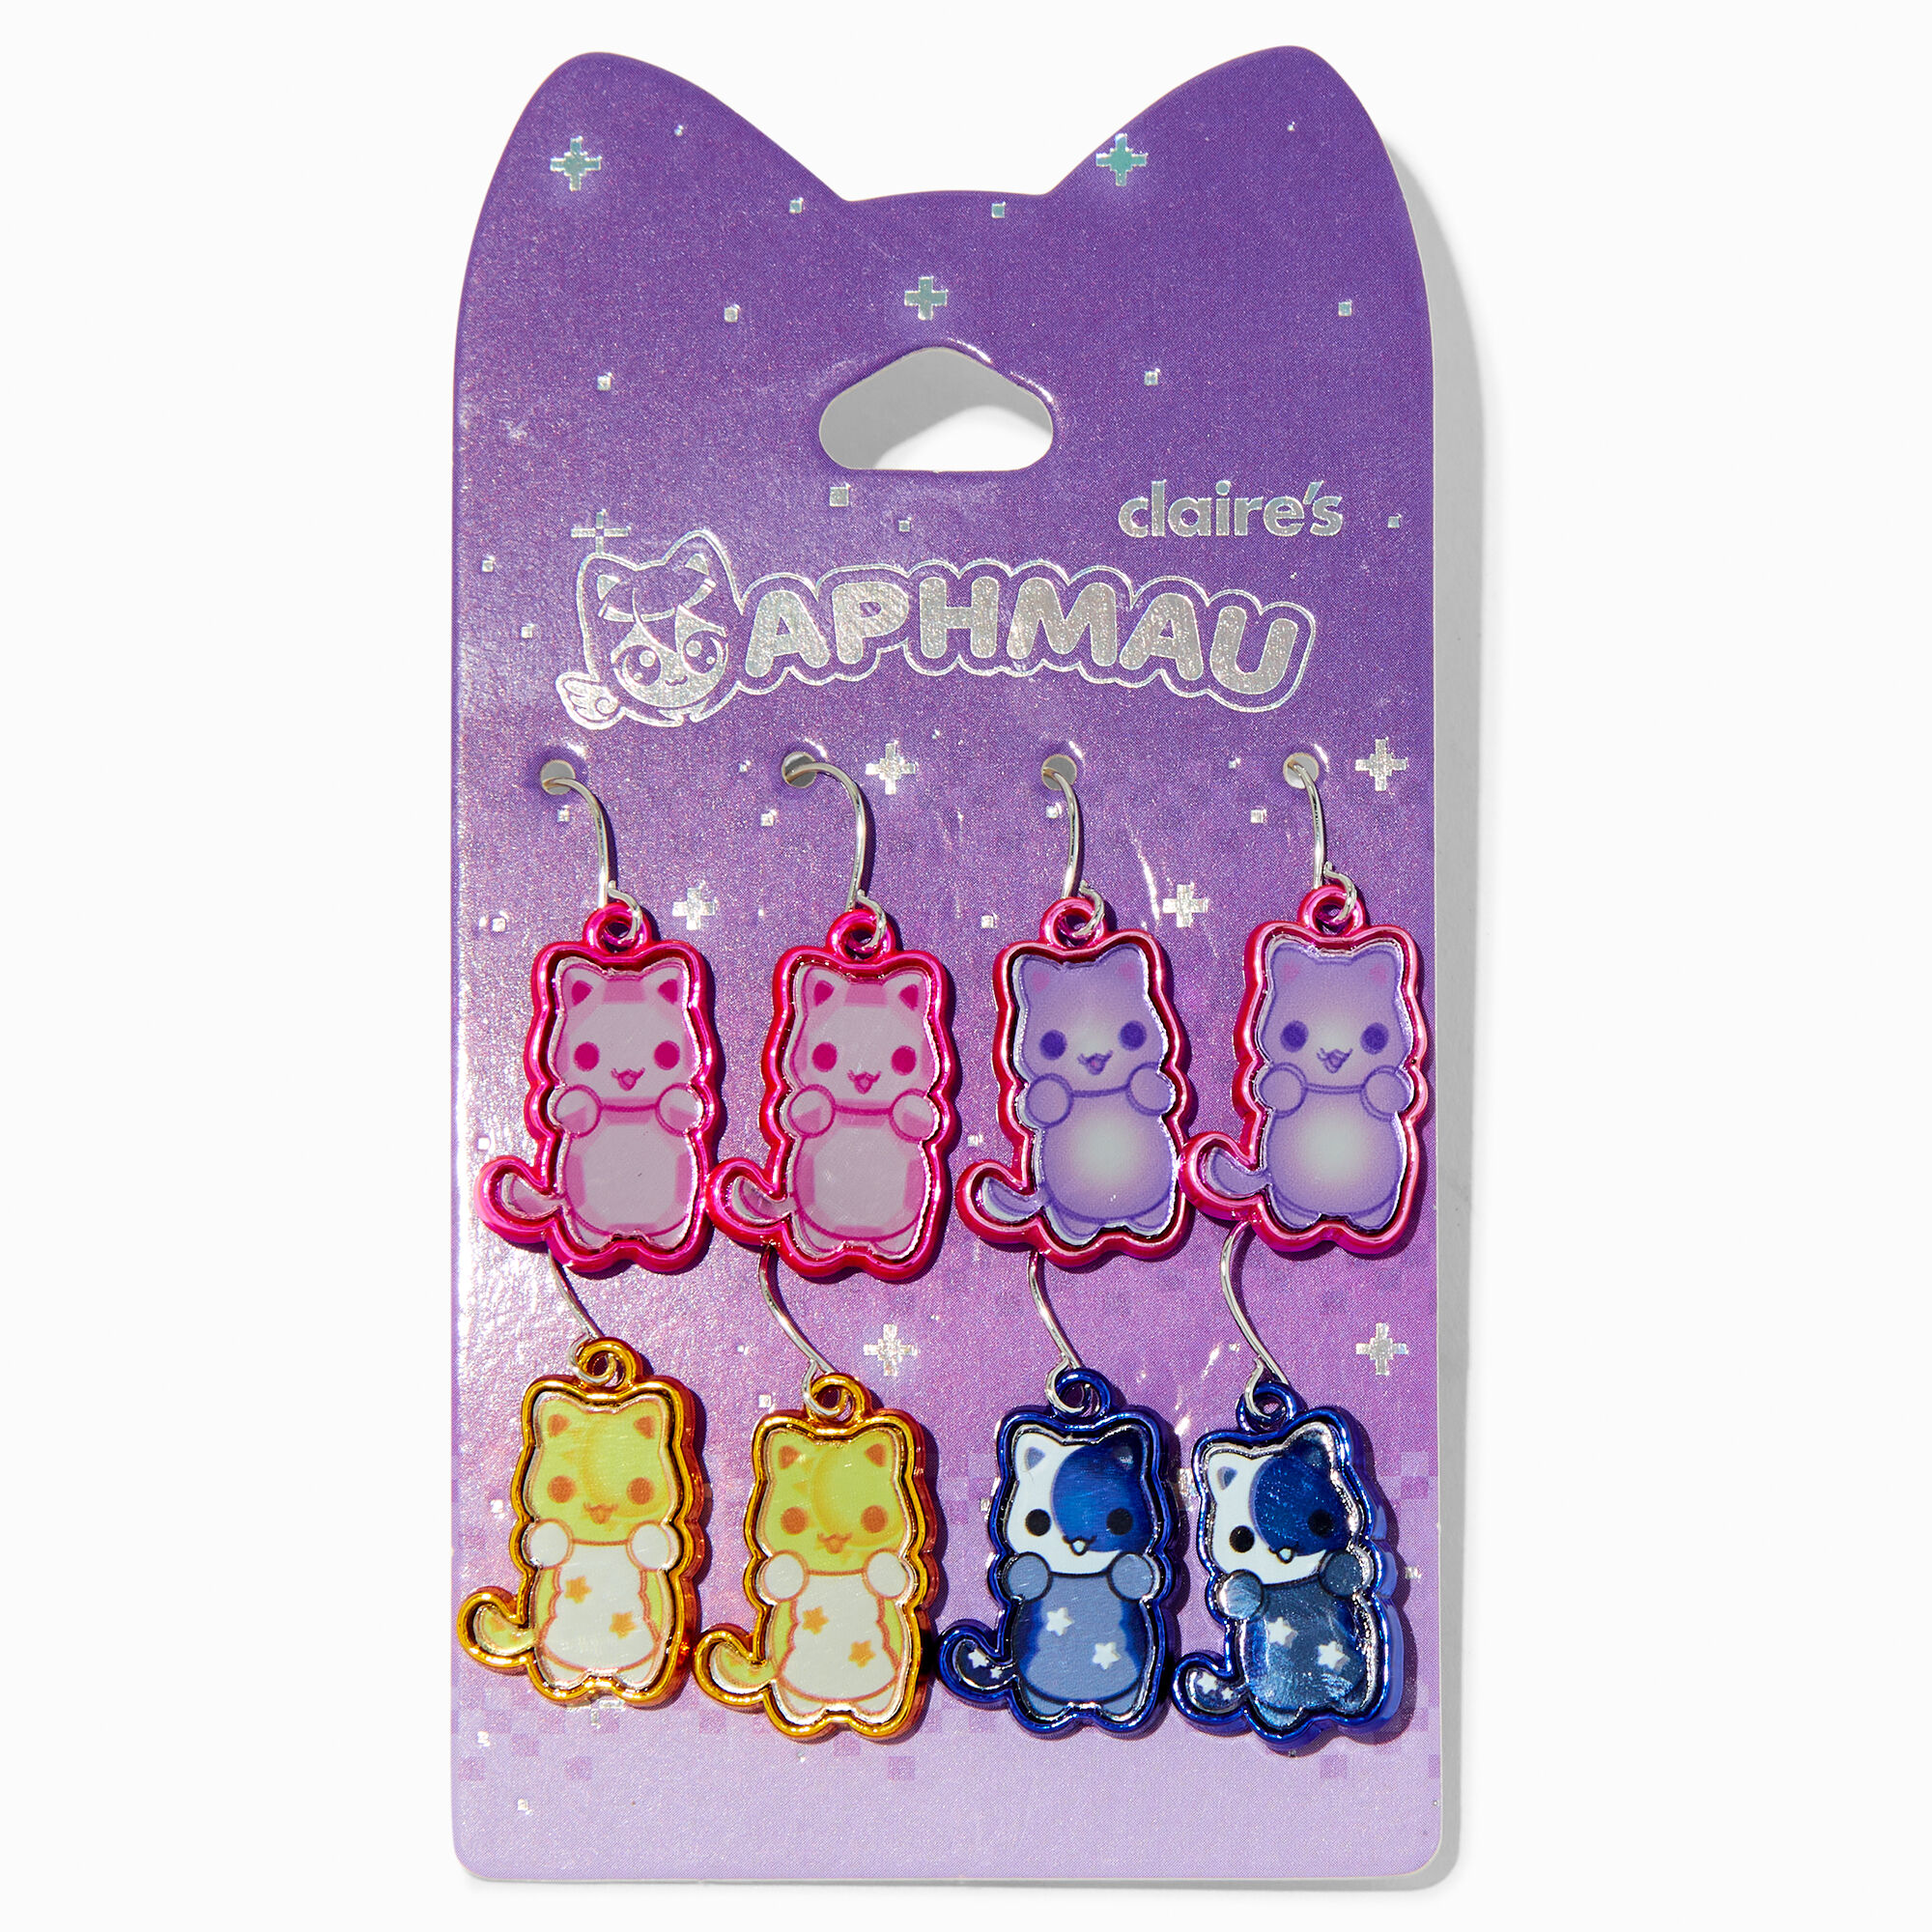 Aphmau™ Claire's Exclusive MeeMeow 1 Drop Earrings - 4 Pack